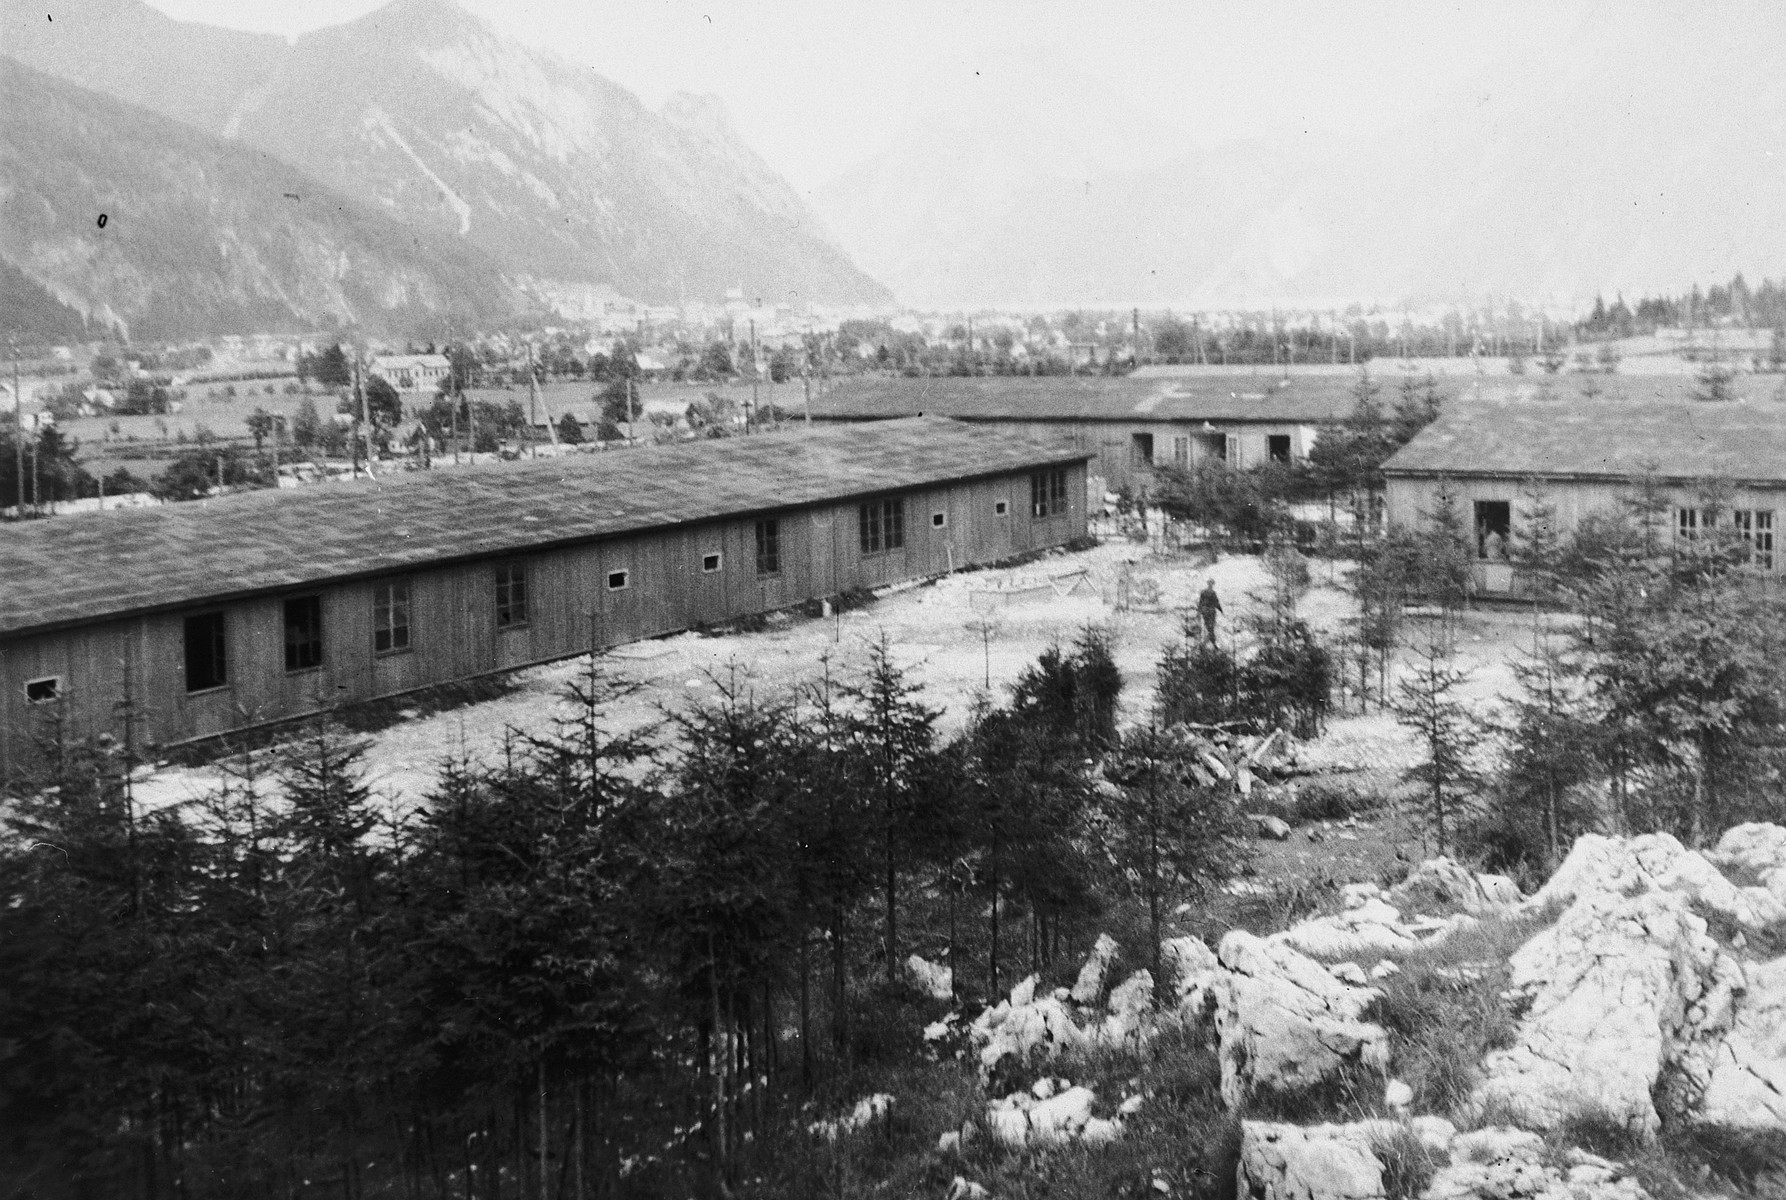 Exterior view of the barracks of the Ebensee subcamp of Mauthausen.

The original caption reads: "View of the barracks where the displaced persons lived.  They were allowed only body space and living three high."